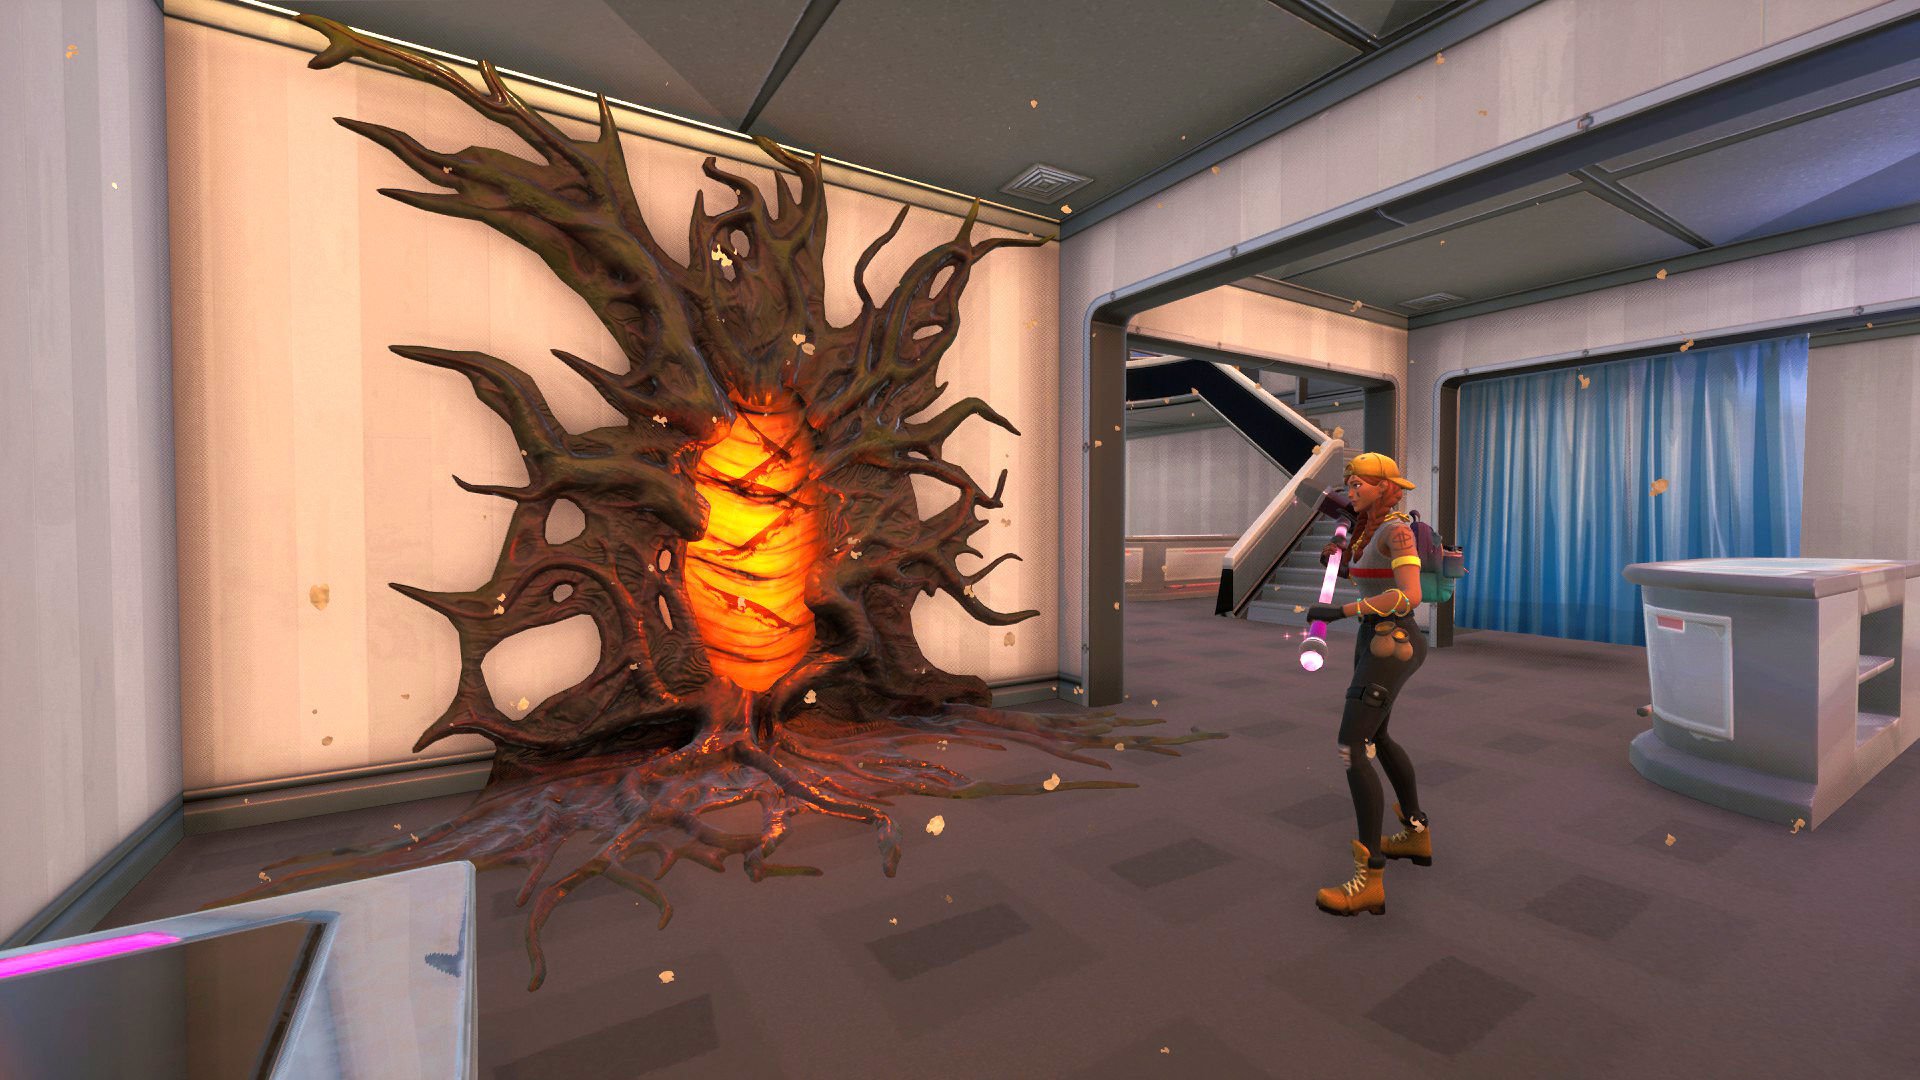 Stranger Things arrives in Fortnite with upside down portals 1920x1080